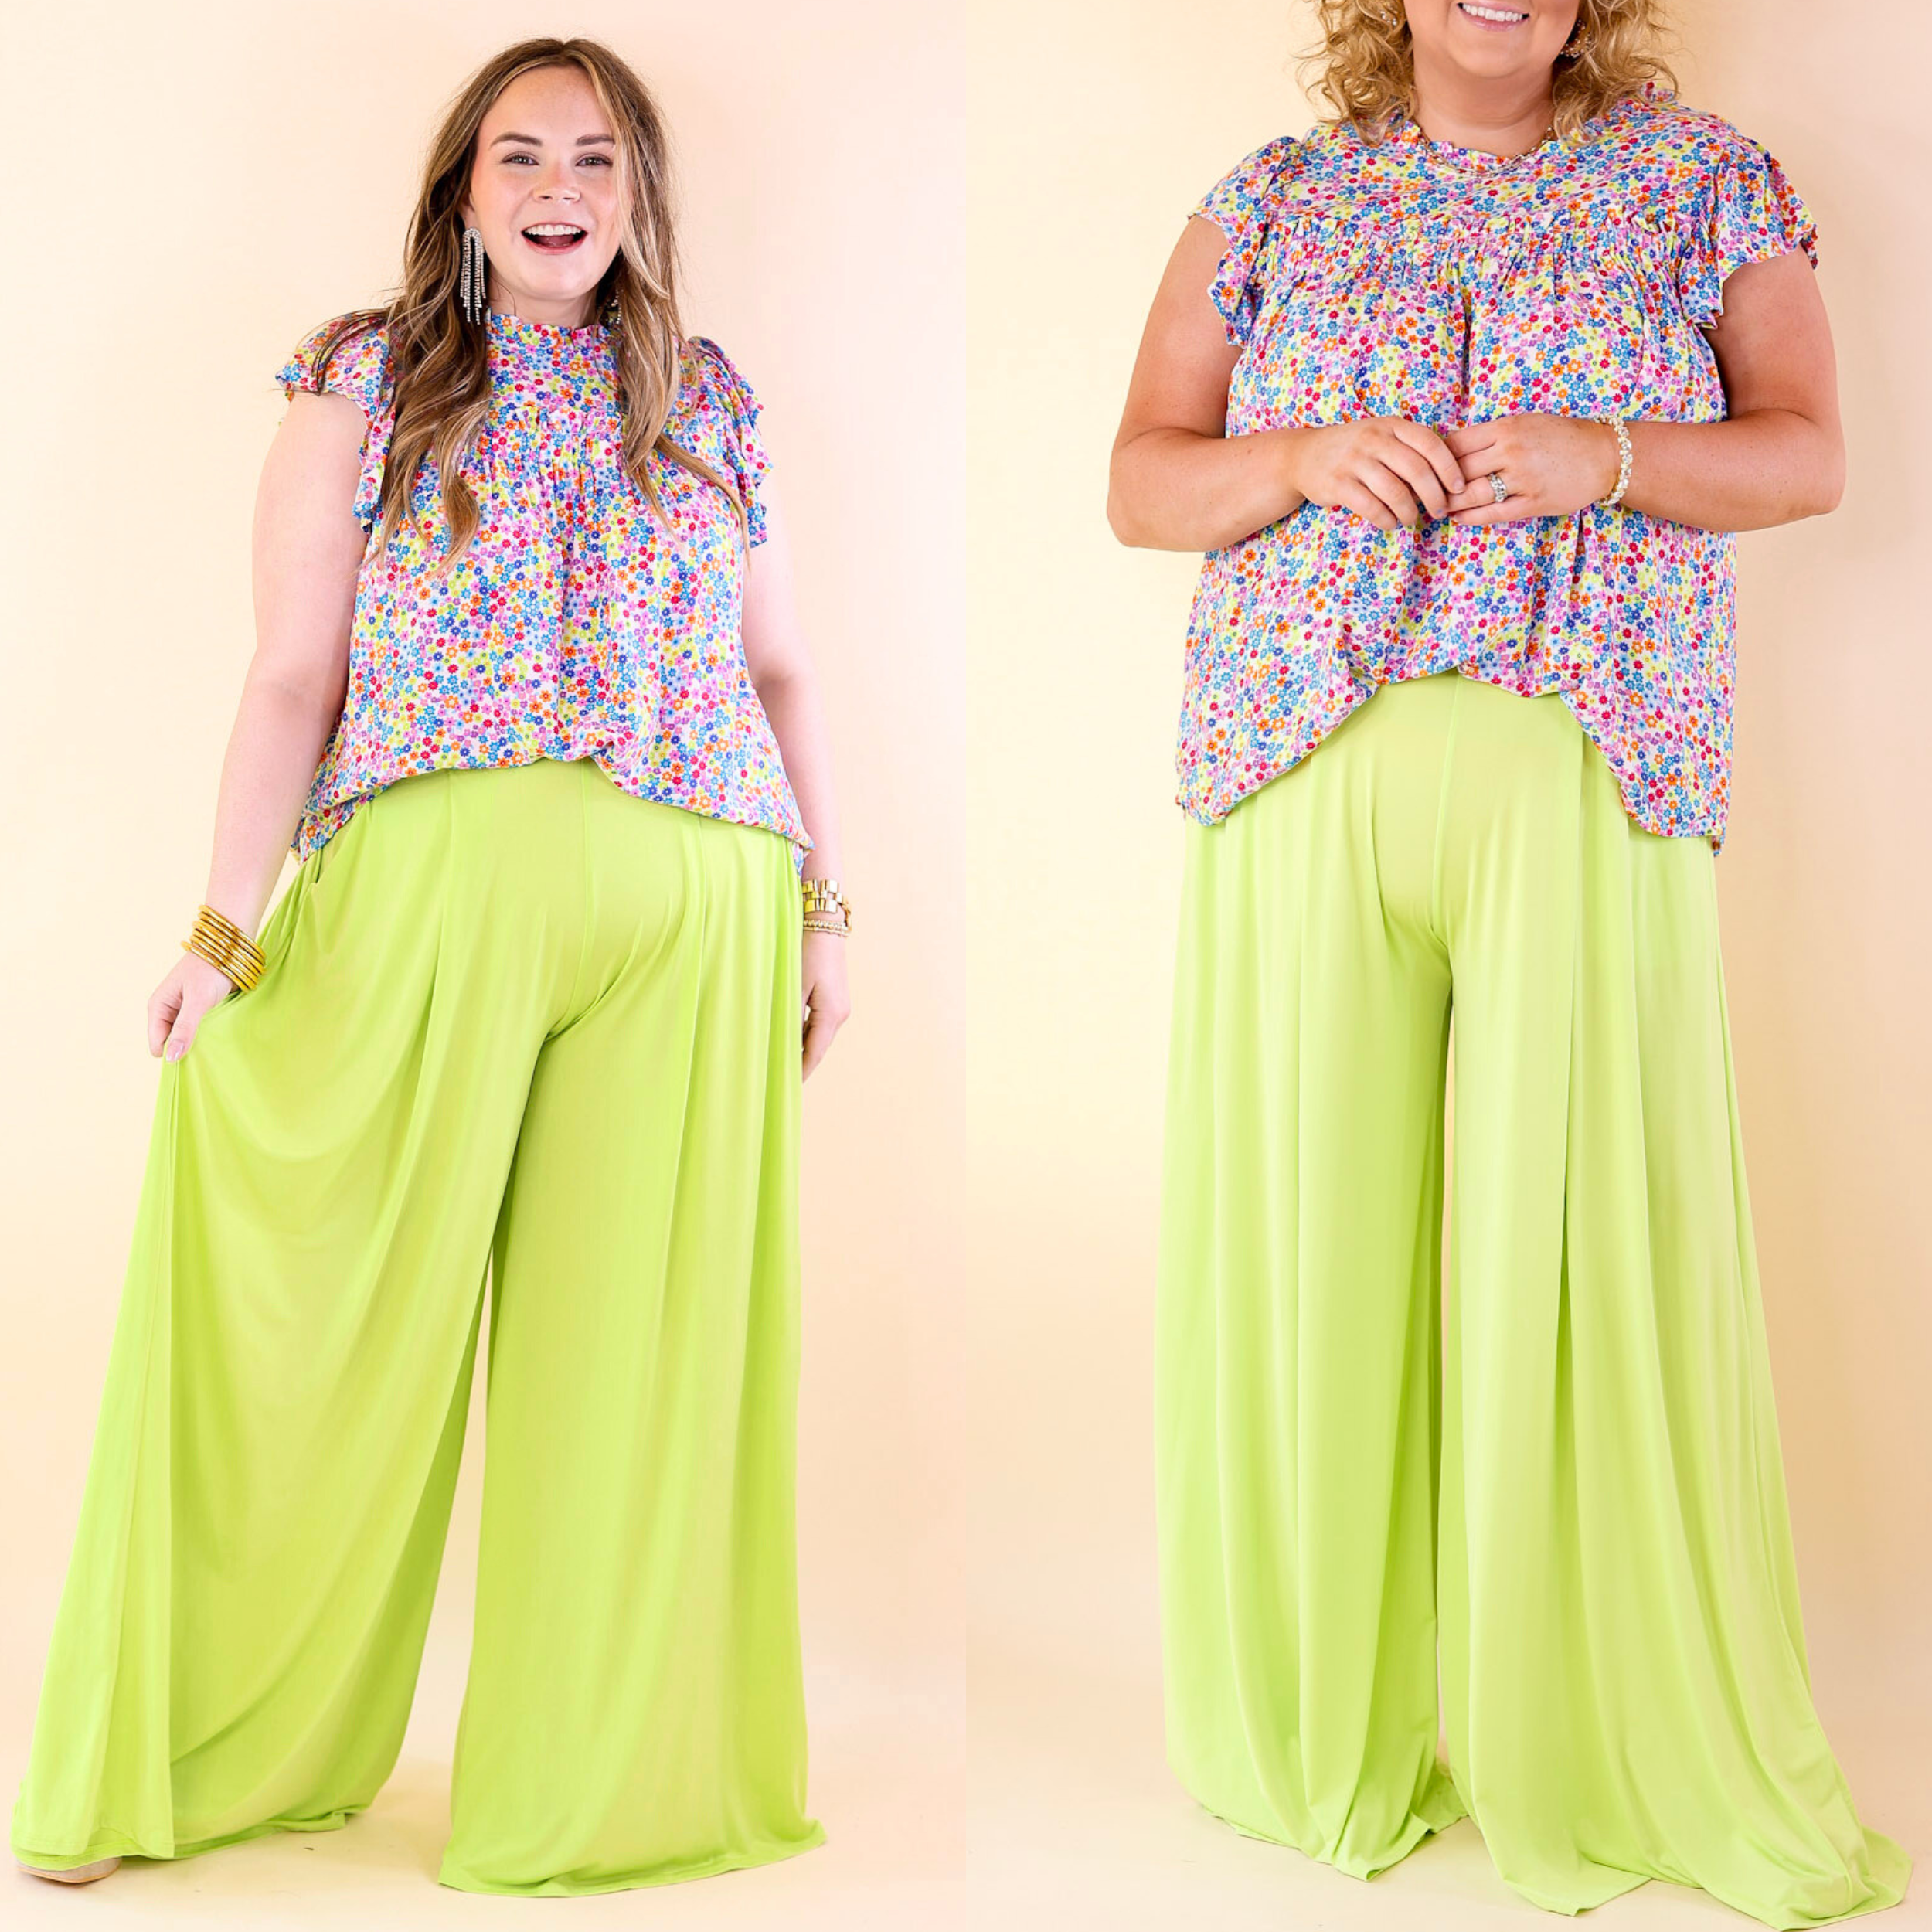 Plus Size | Urban Wonders Wide Leg Pants in Neon Lime - Giddy Up Glamour Boutique